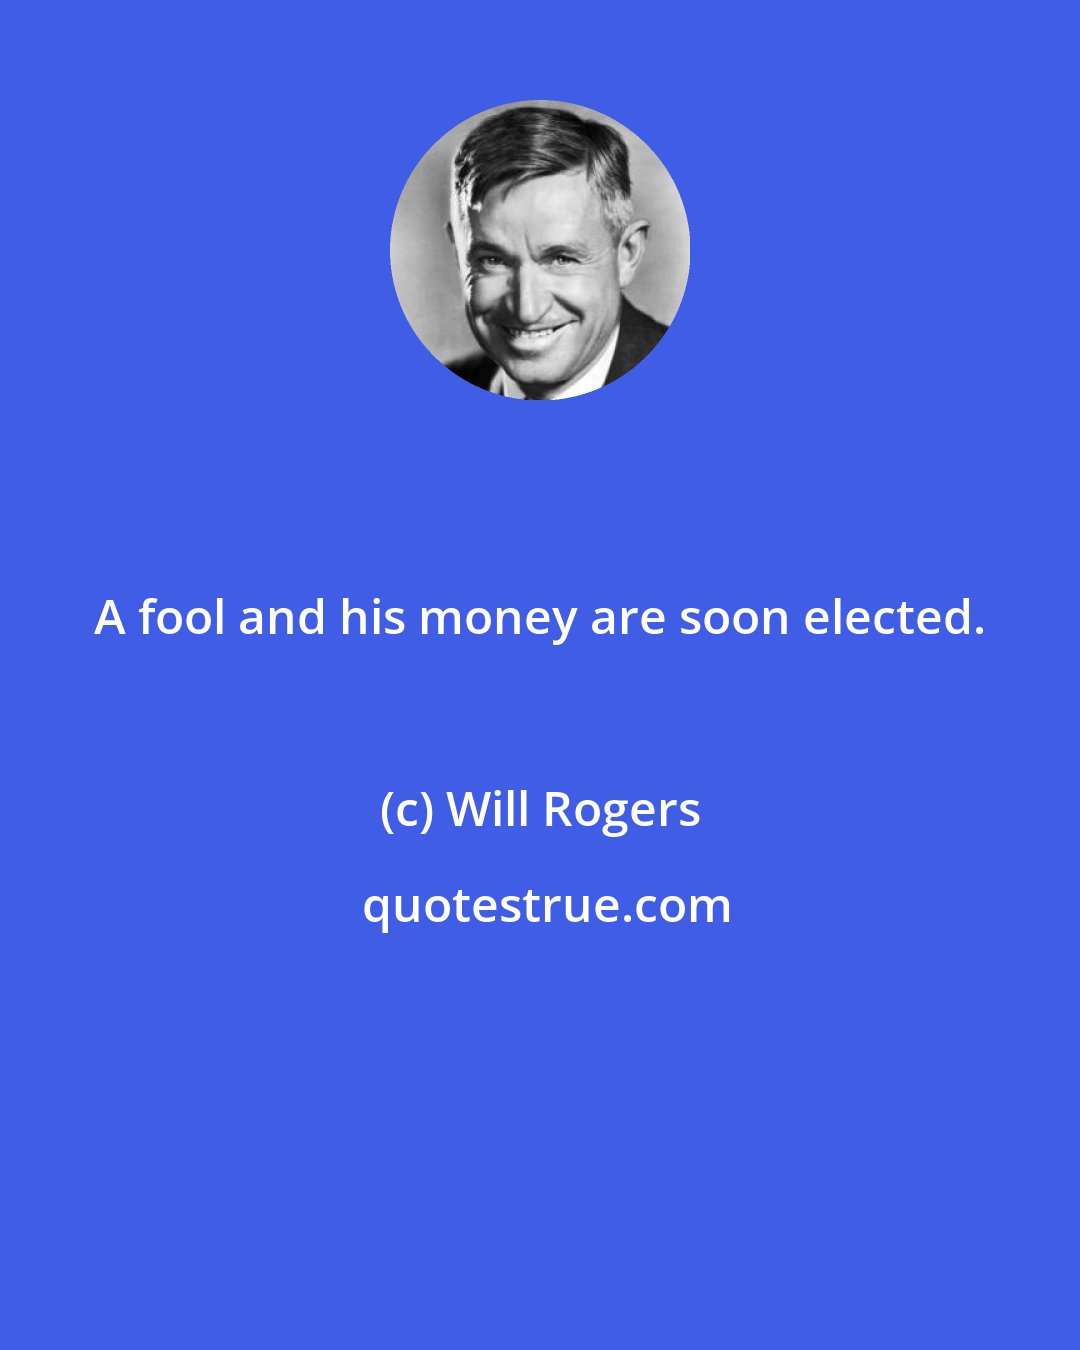 Will Rogers: A fool and his money are soon elected.